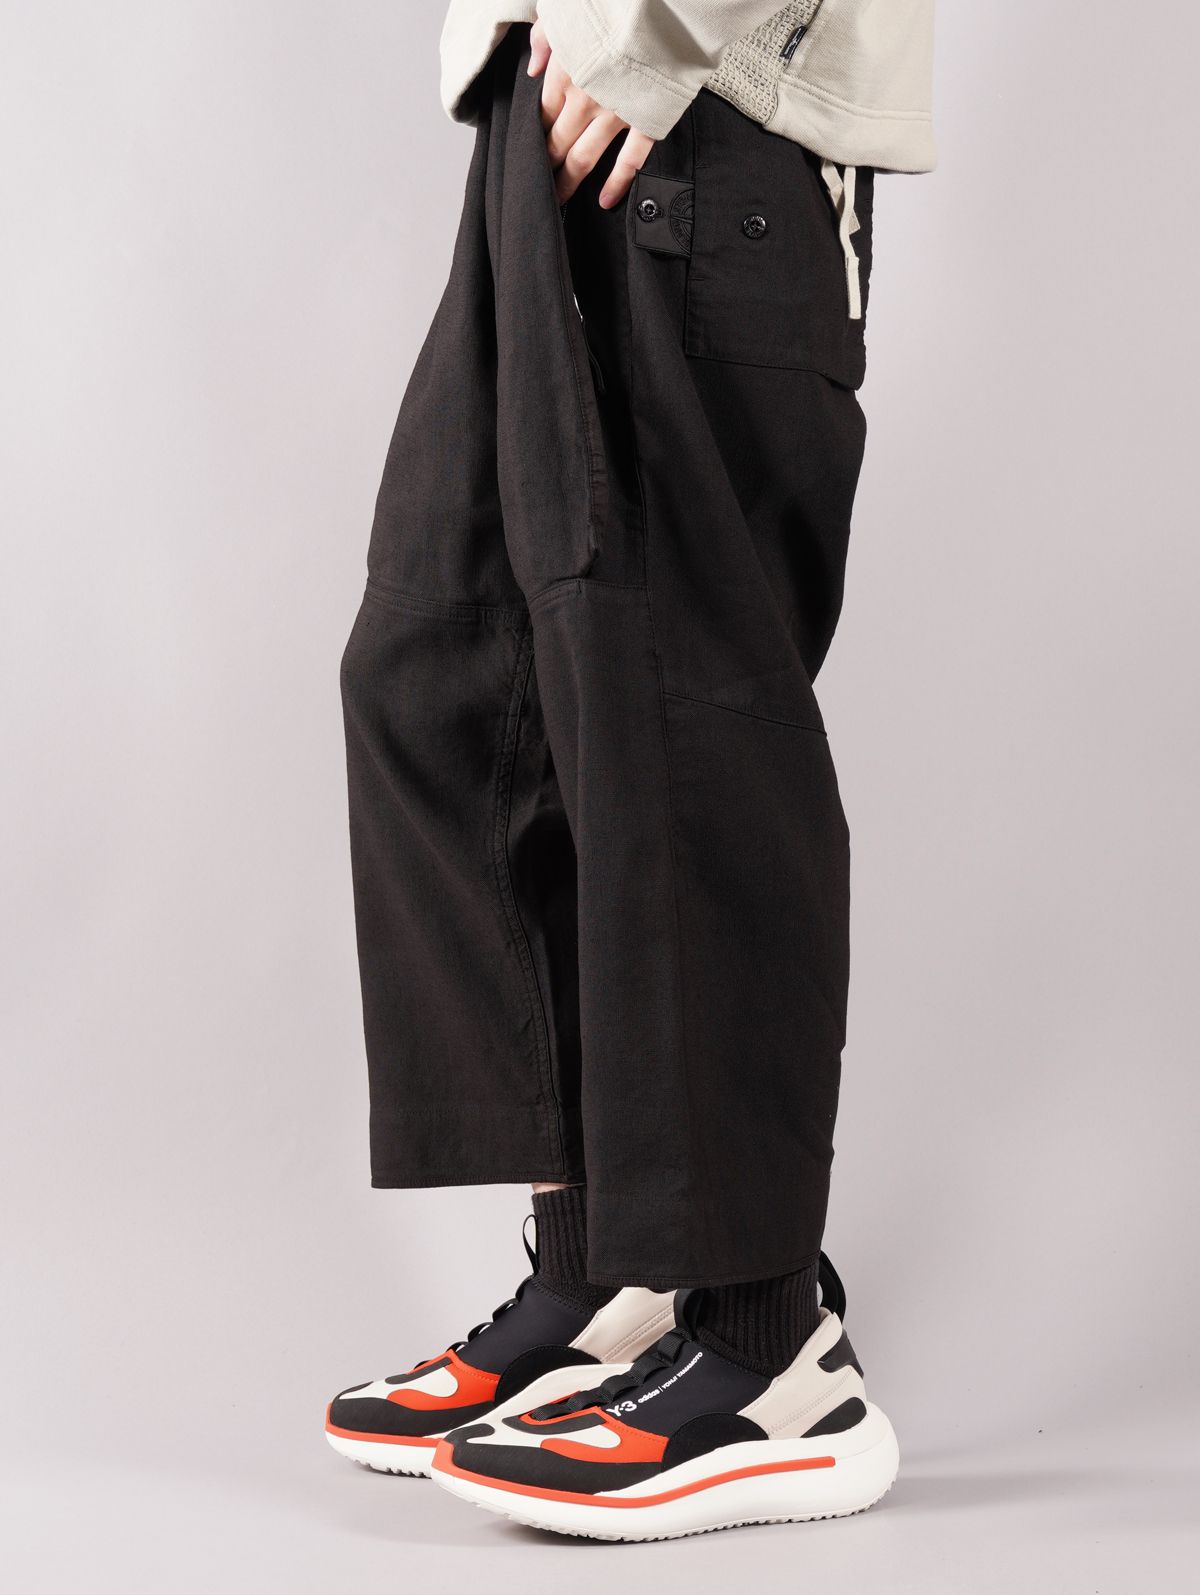 STONE ISLAND SHADOW PROJECT - WORKWEAR WIDE PANT_CHAPTER 1 LINEN 